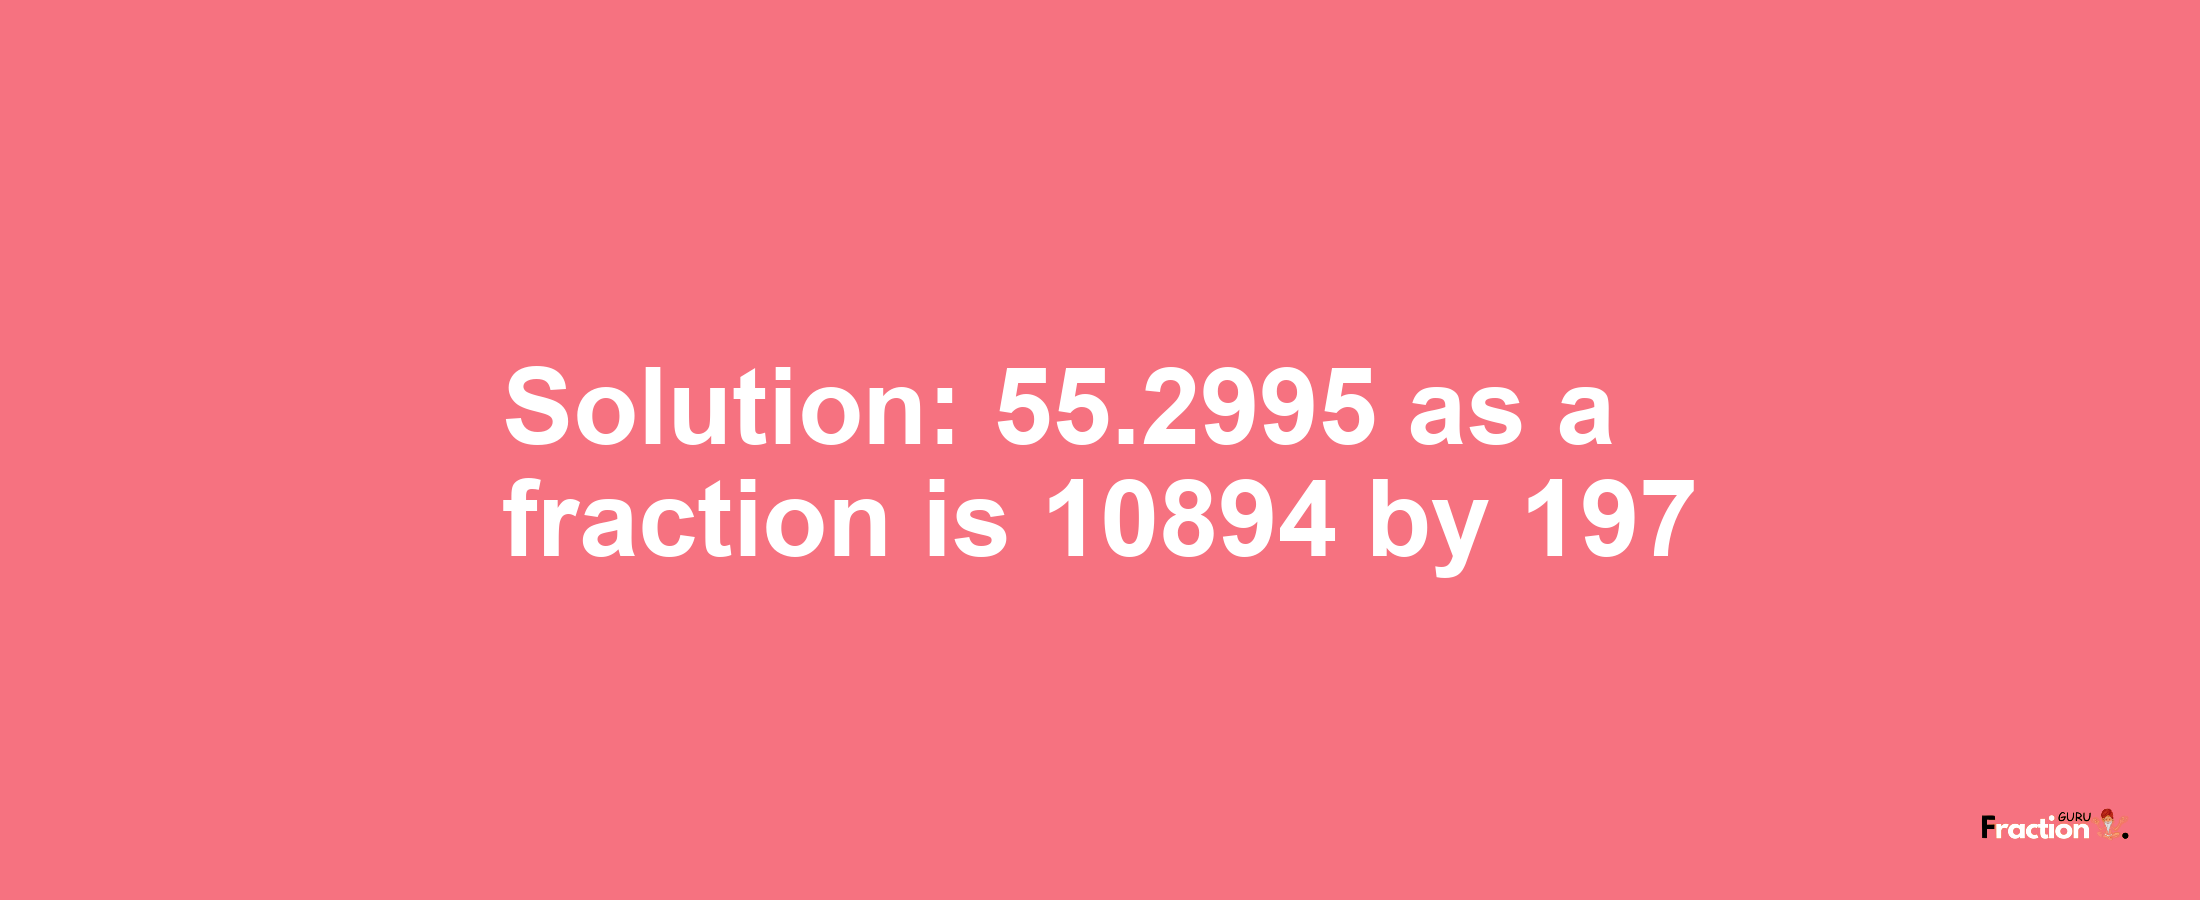 Solution:55.2995 as a fraction is 10894/197